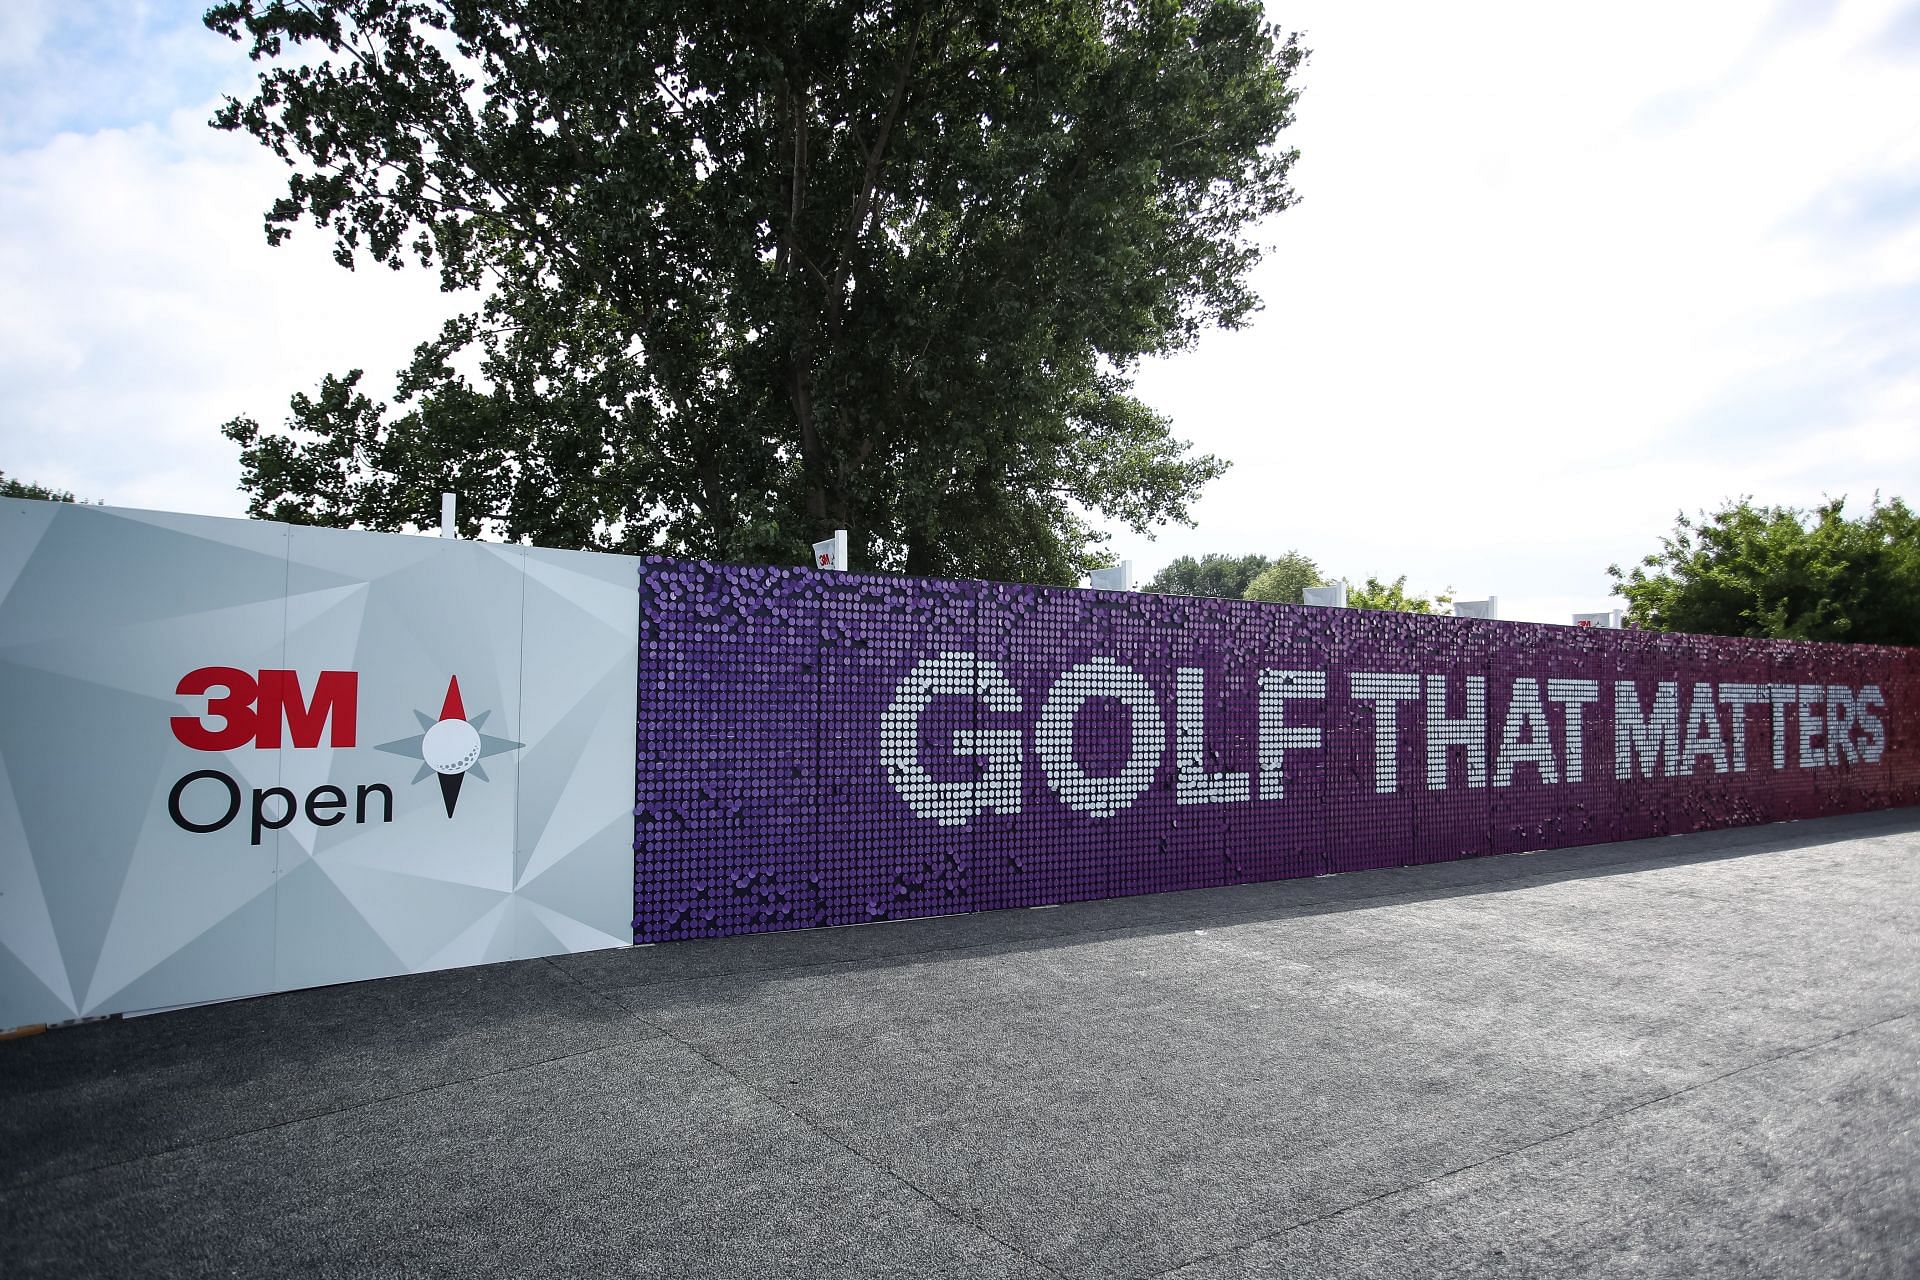 The 3M Open will tee off on Thursday, July 27